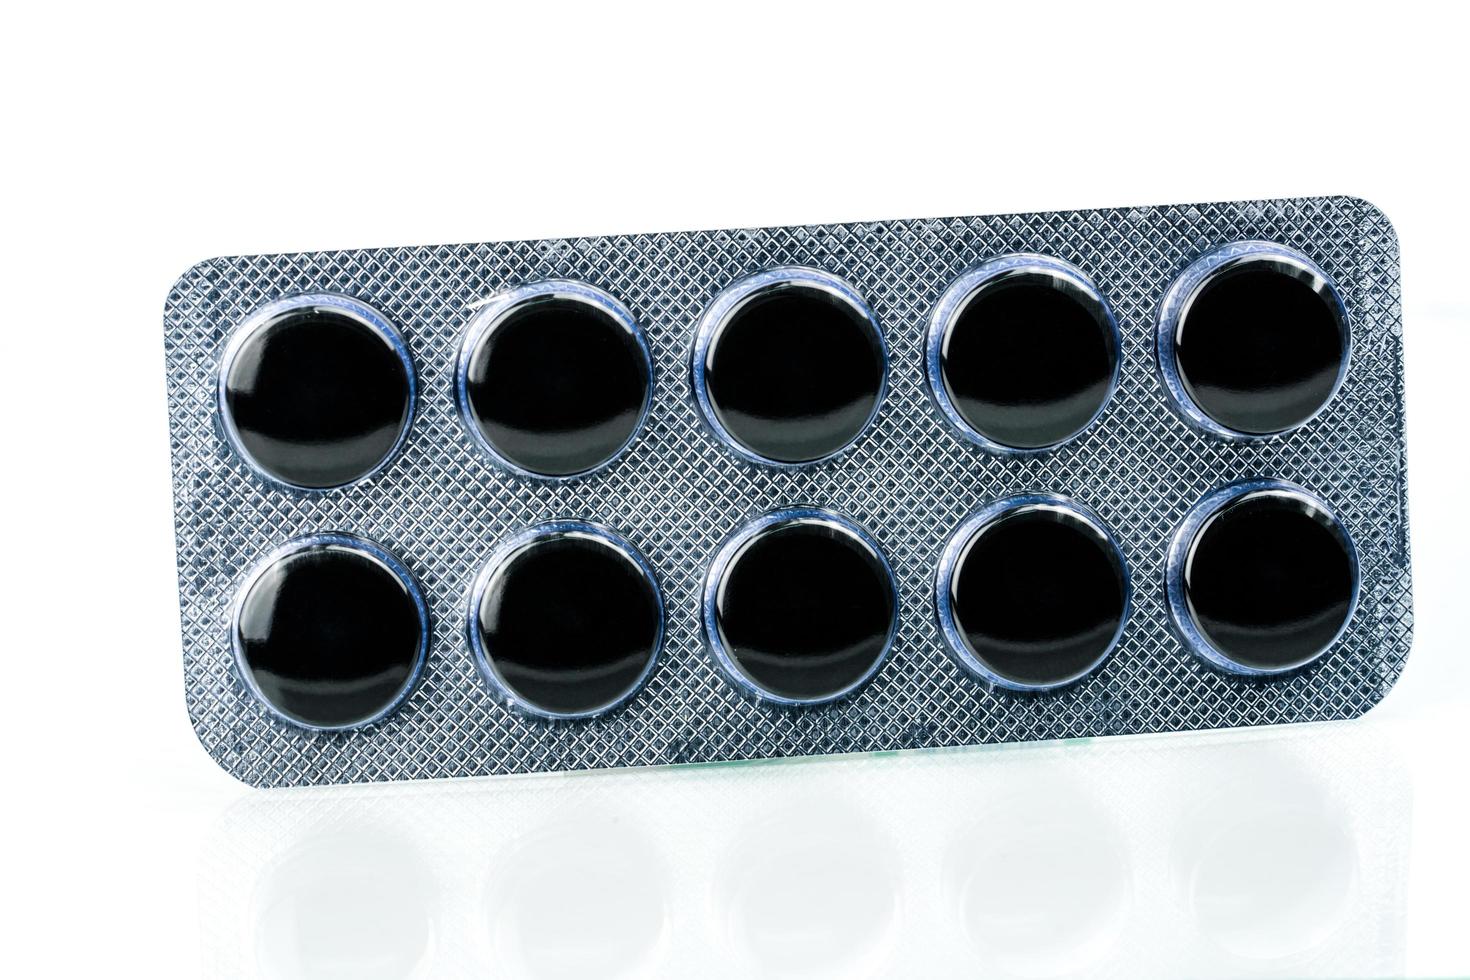 Activated charcoal tablets pills in blister pack isolated on white background with copy space for text. Black round pills for treatment poisoning from take drug overdose photo